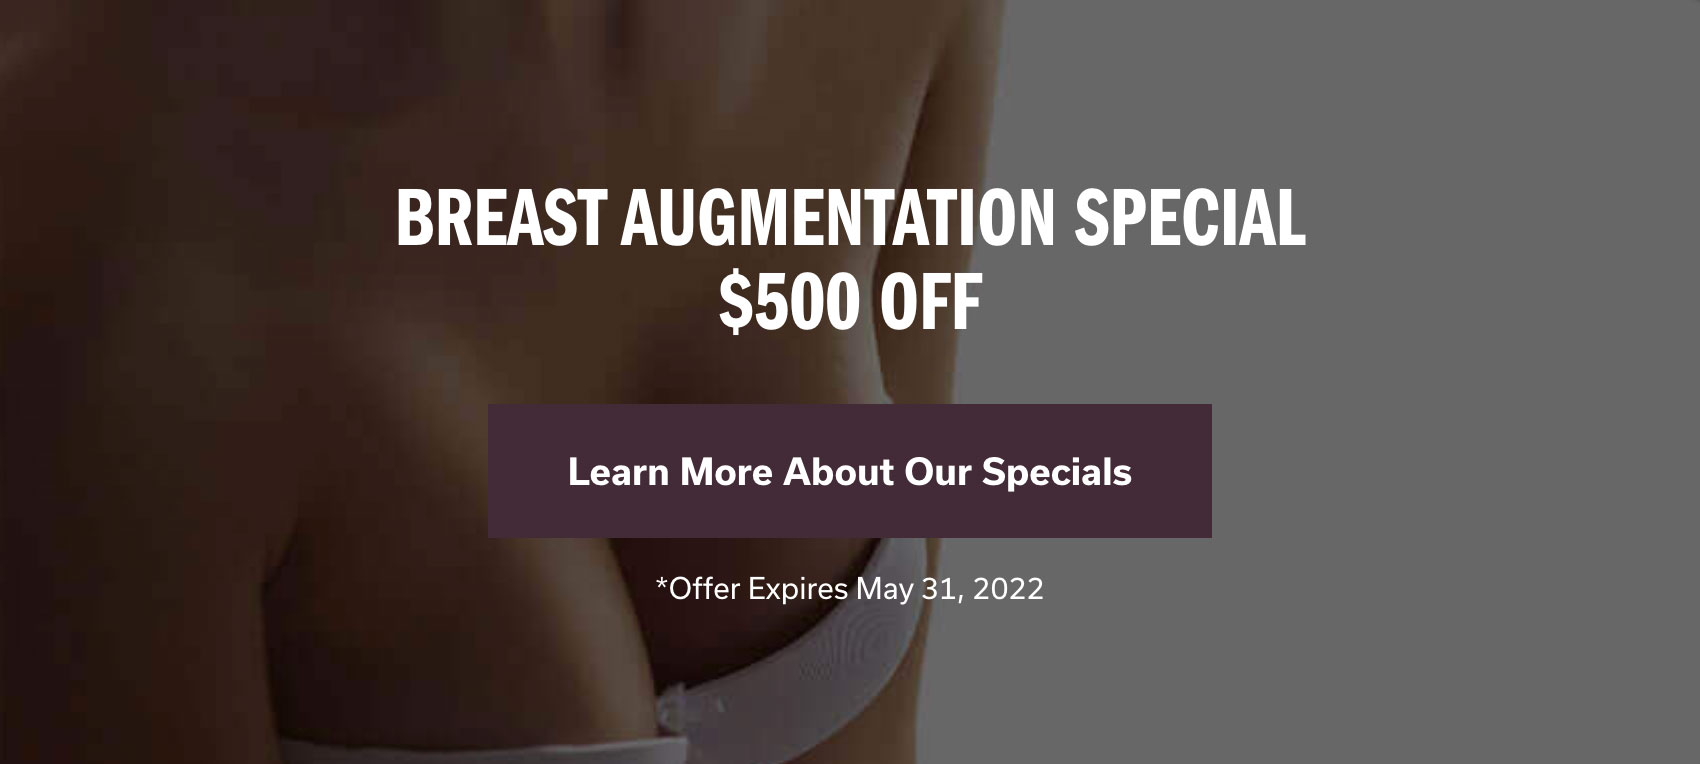 Breast Augmentation Special $500 off. Offer Expires May 31, 2022